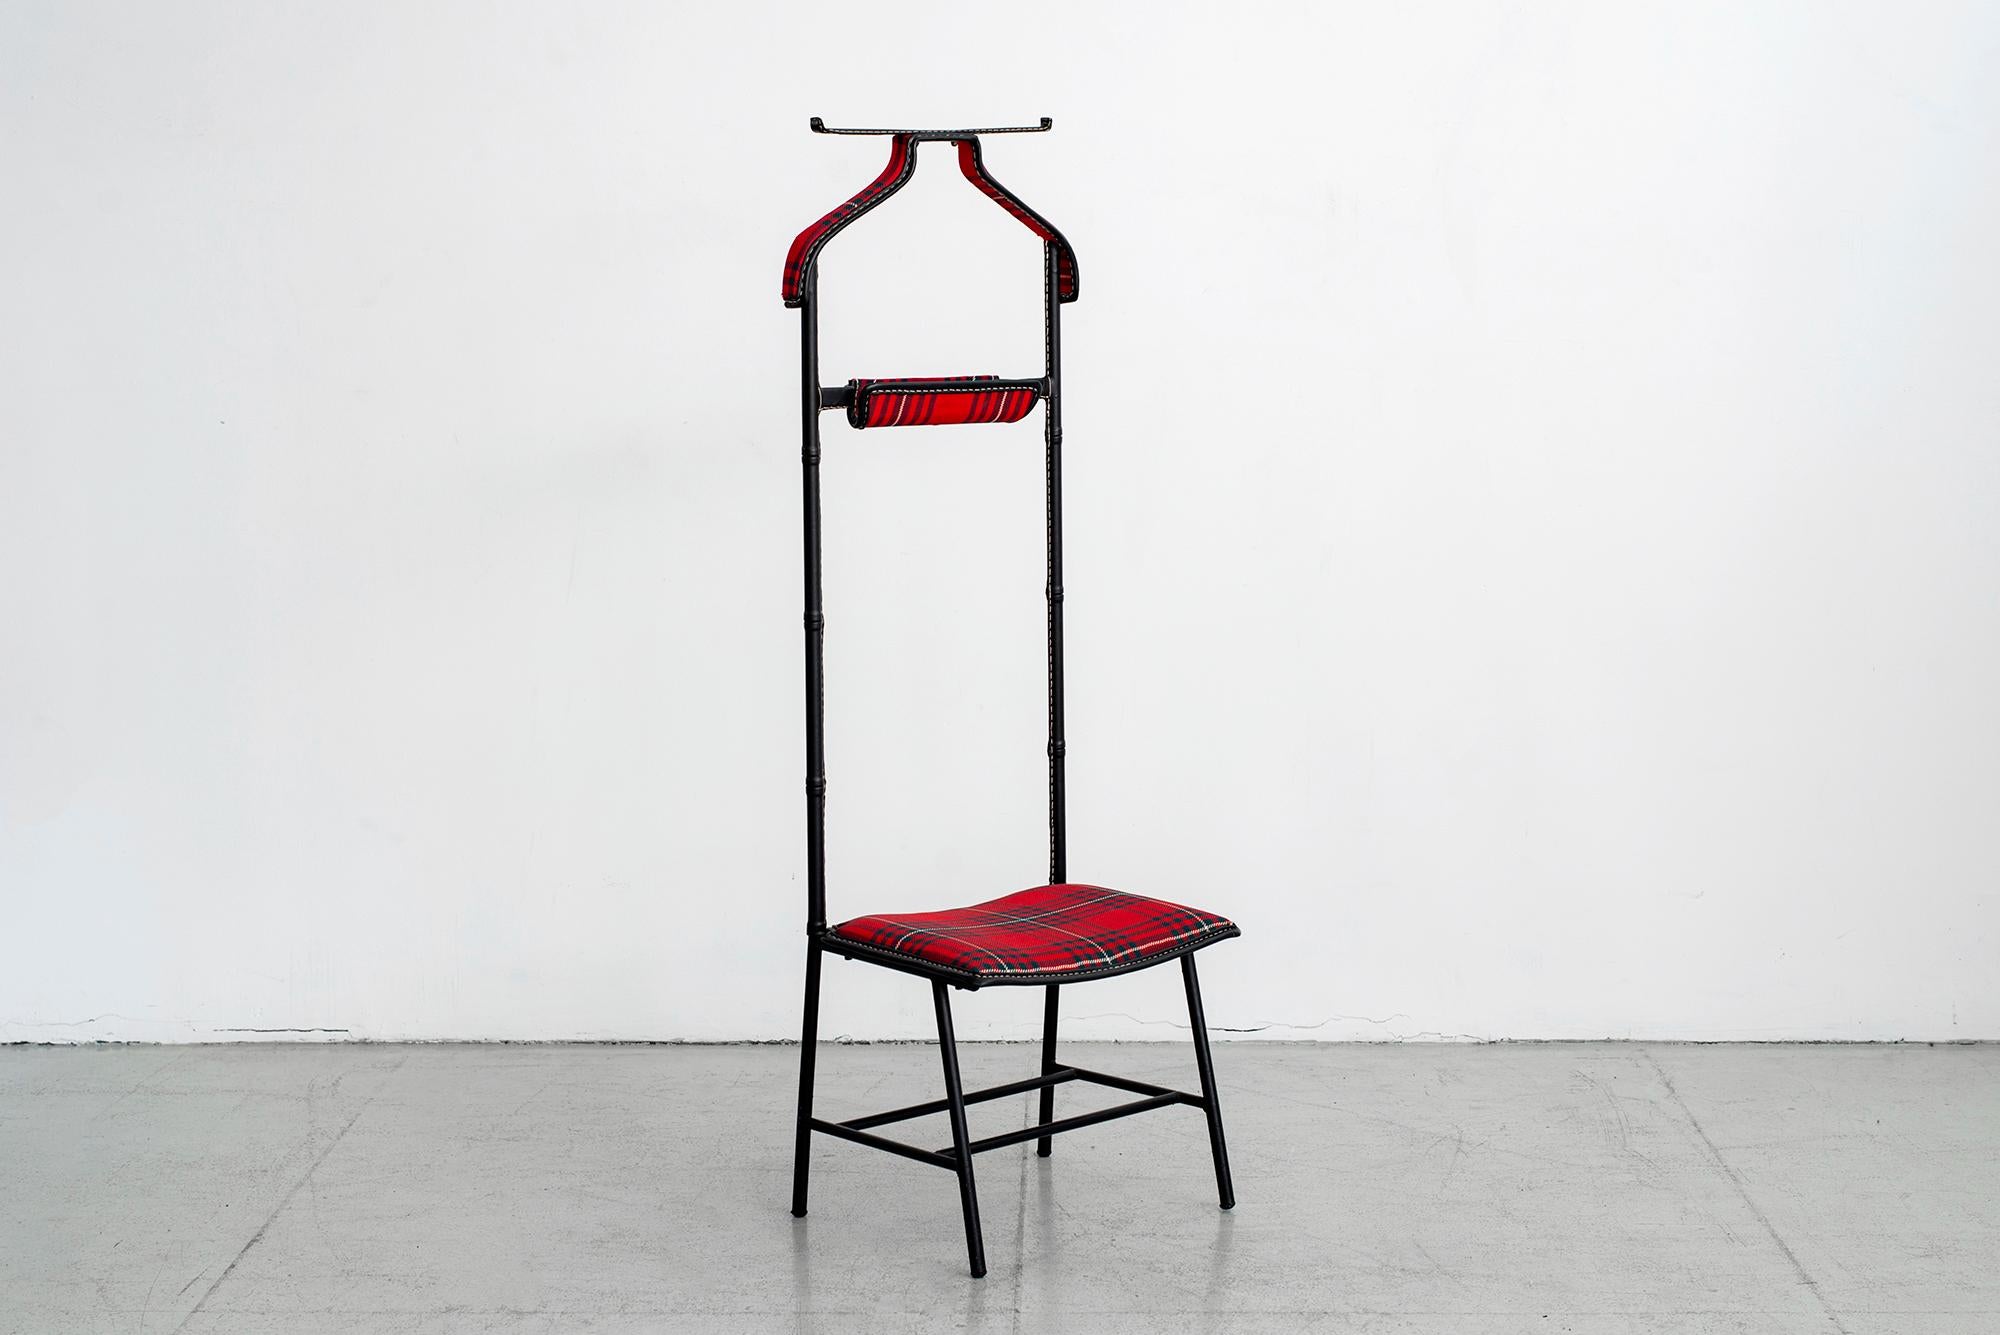 Jacques Adnet Valet in red tartan plaid seat, coat hanger and catch all. 
Signature black leather with contrast stitching. 

Measure: Seat height is 13